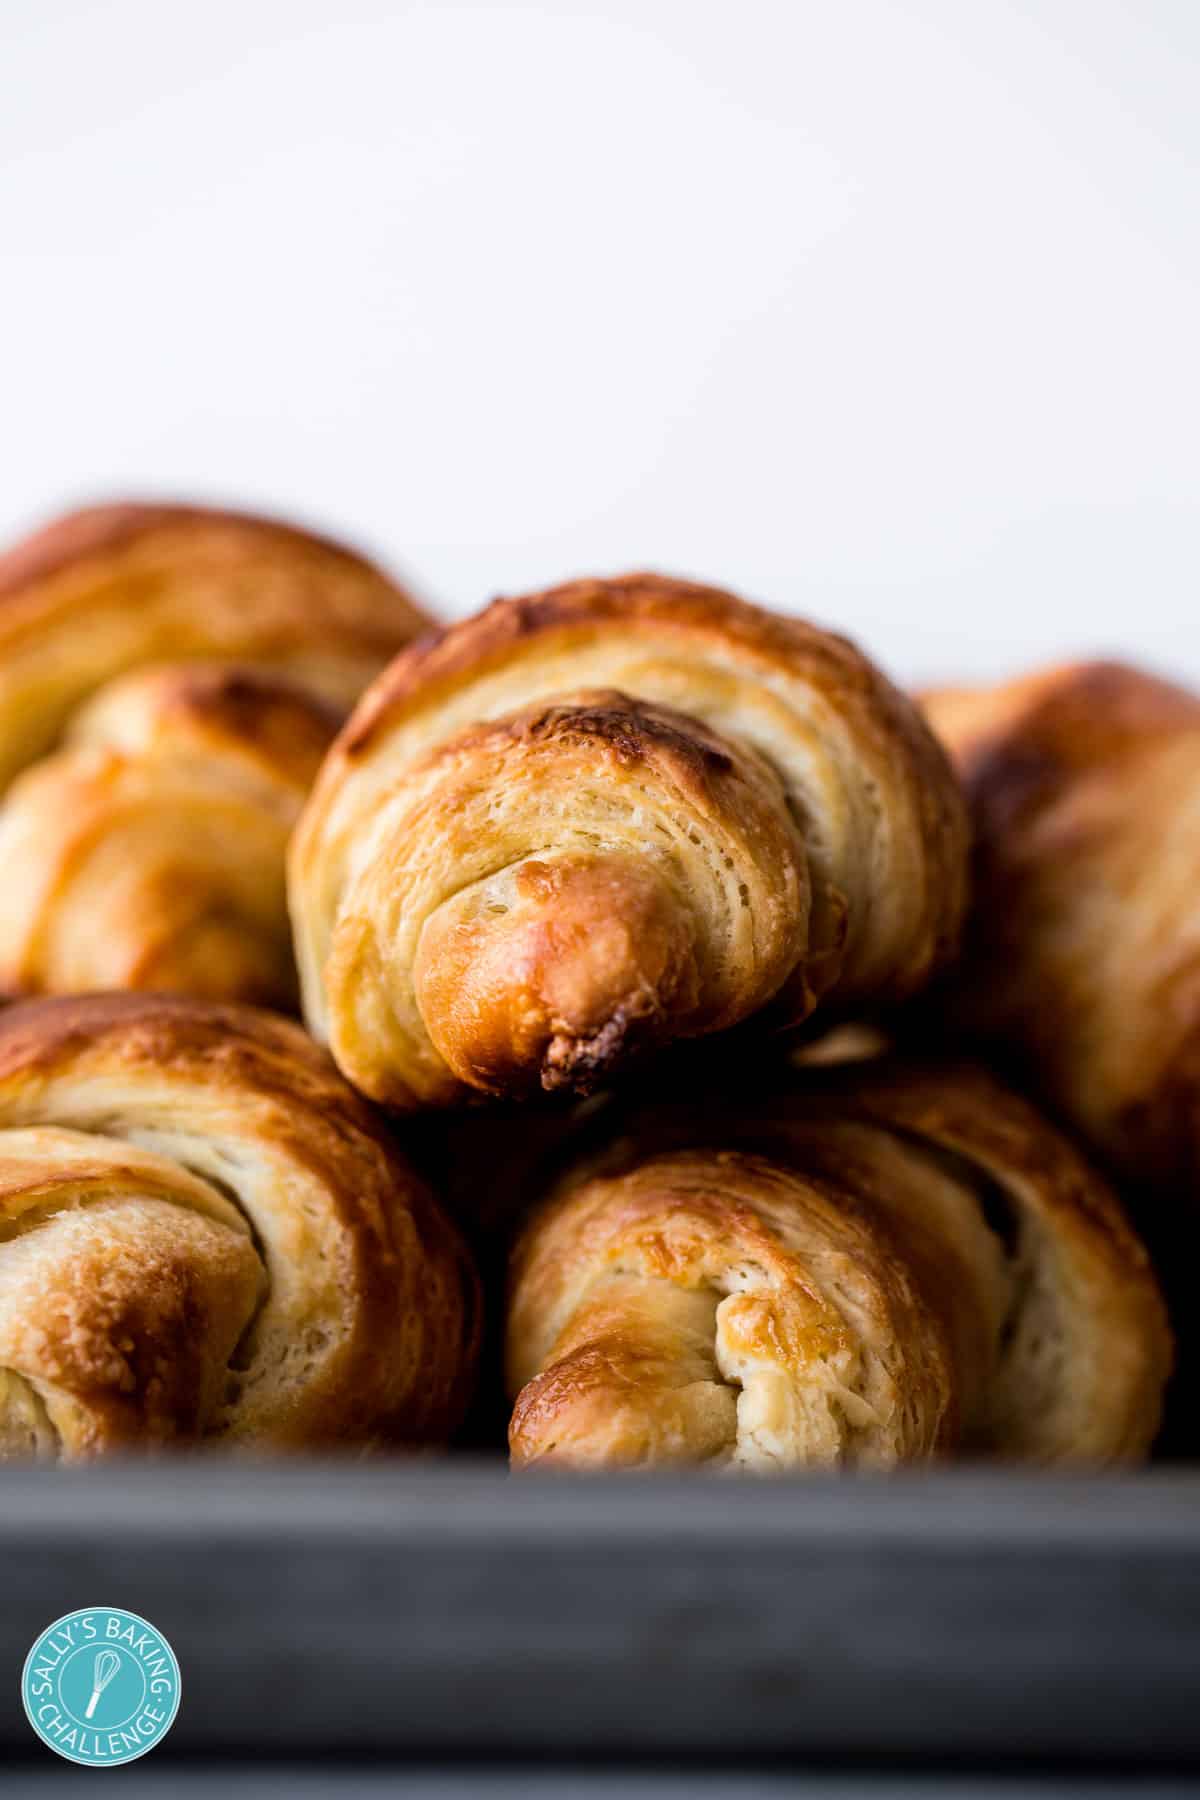 How to Make Croissants - Sally's Baking Addiction